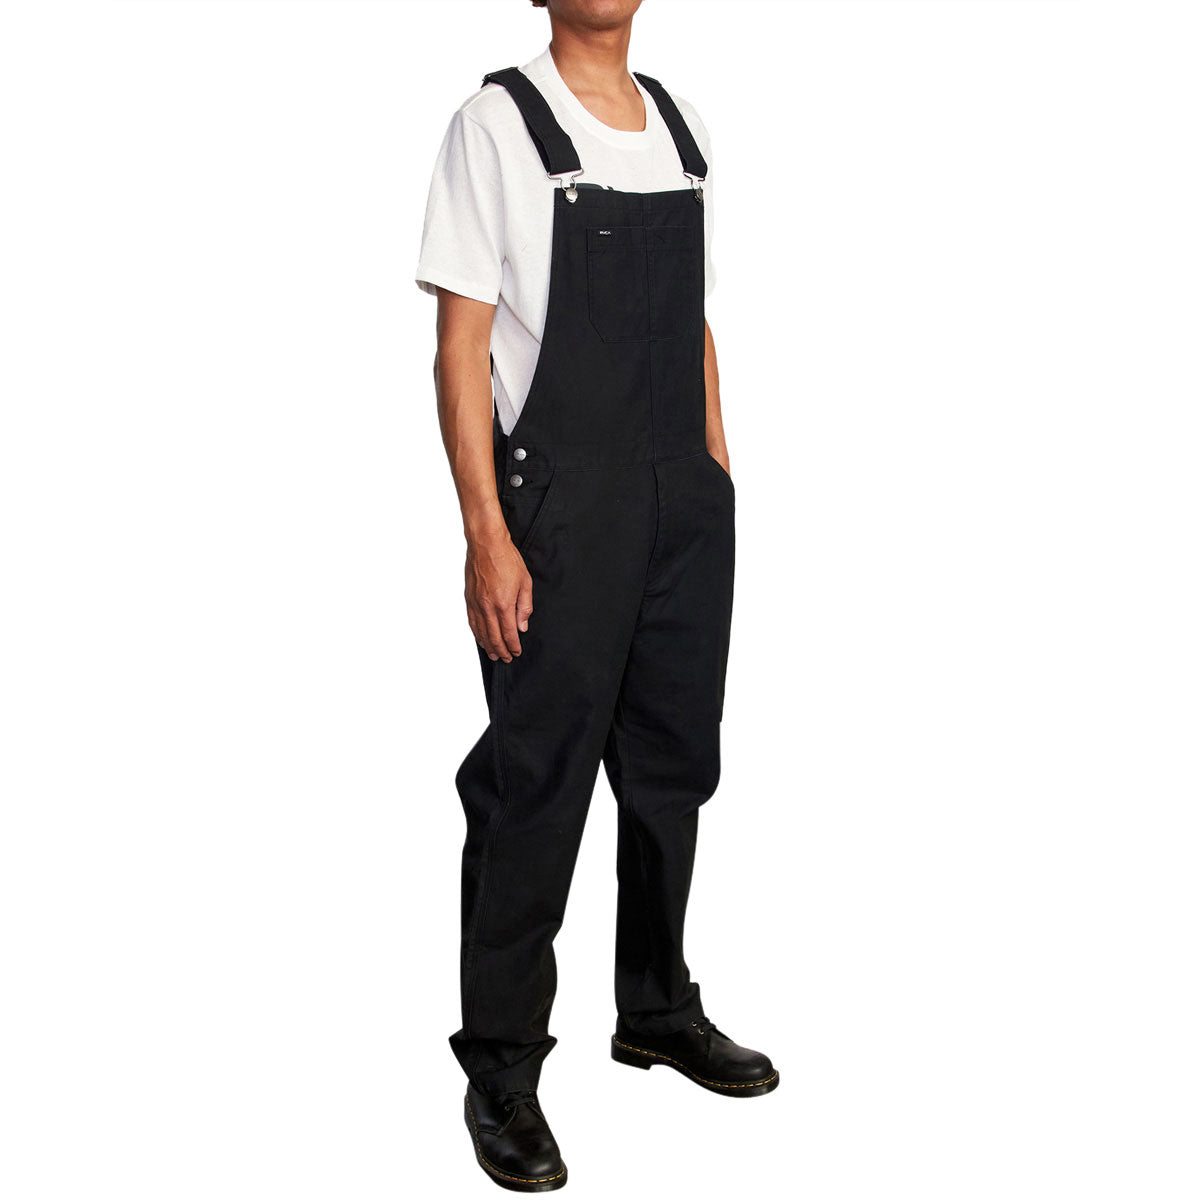 RVCA Chainmail Overall Pants - Rvca Black image 4